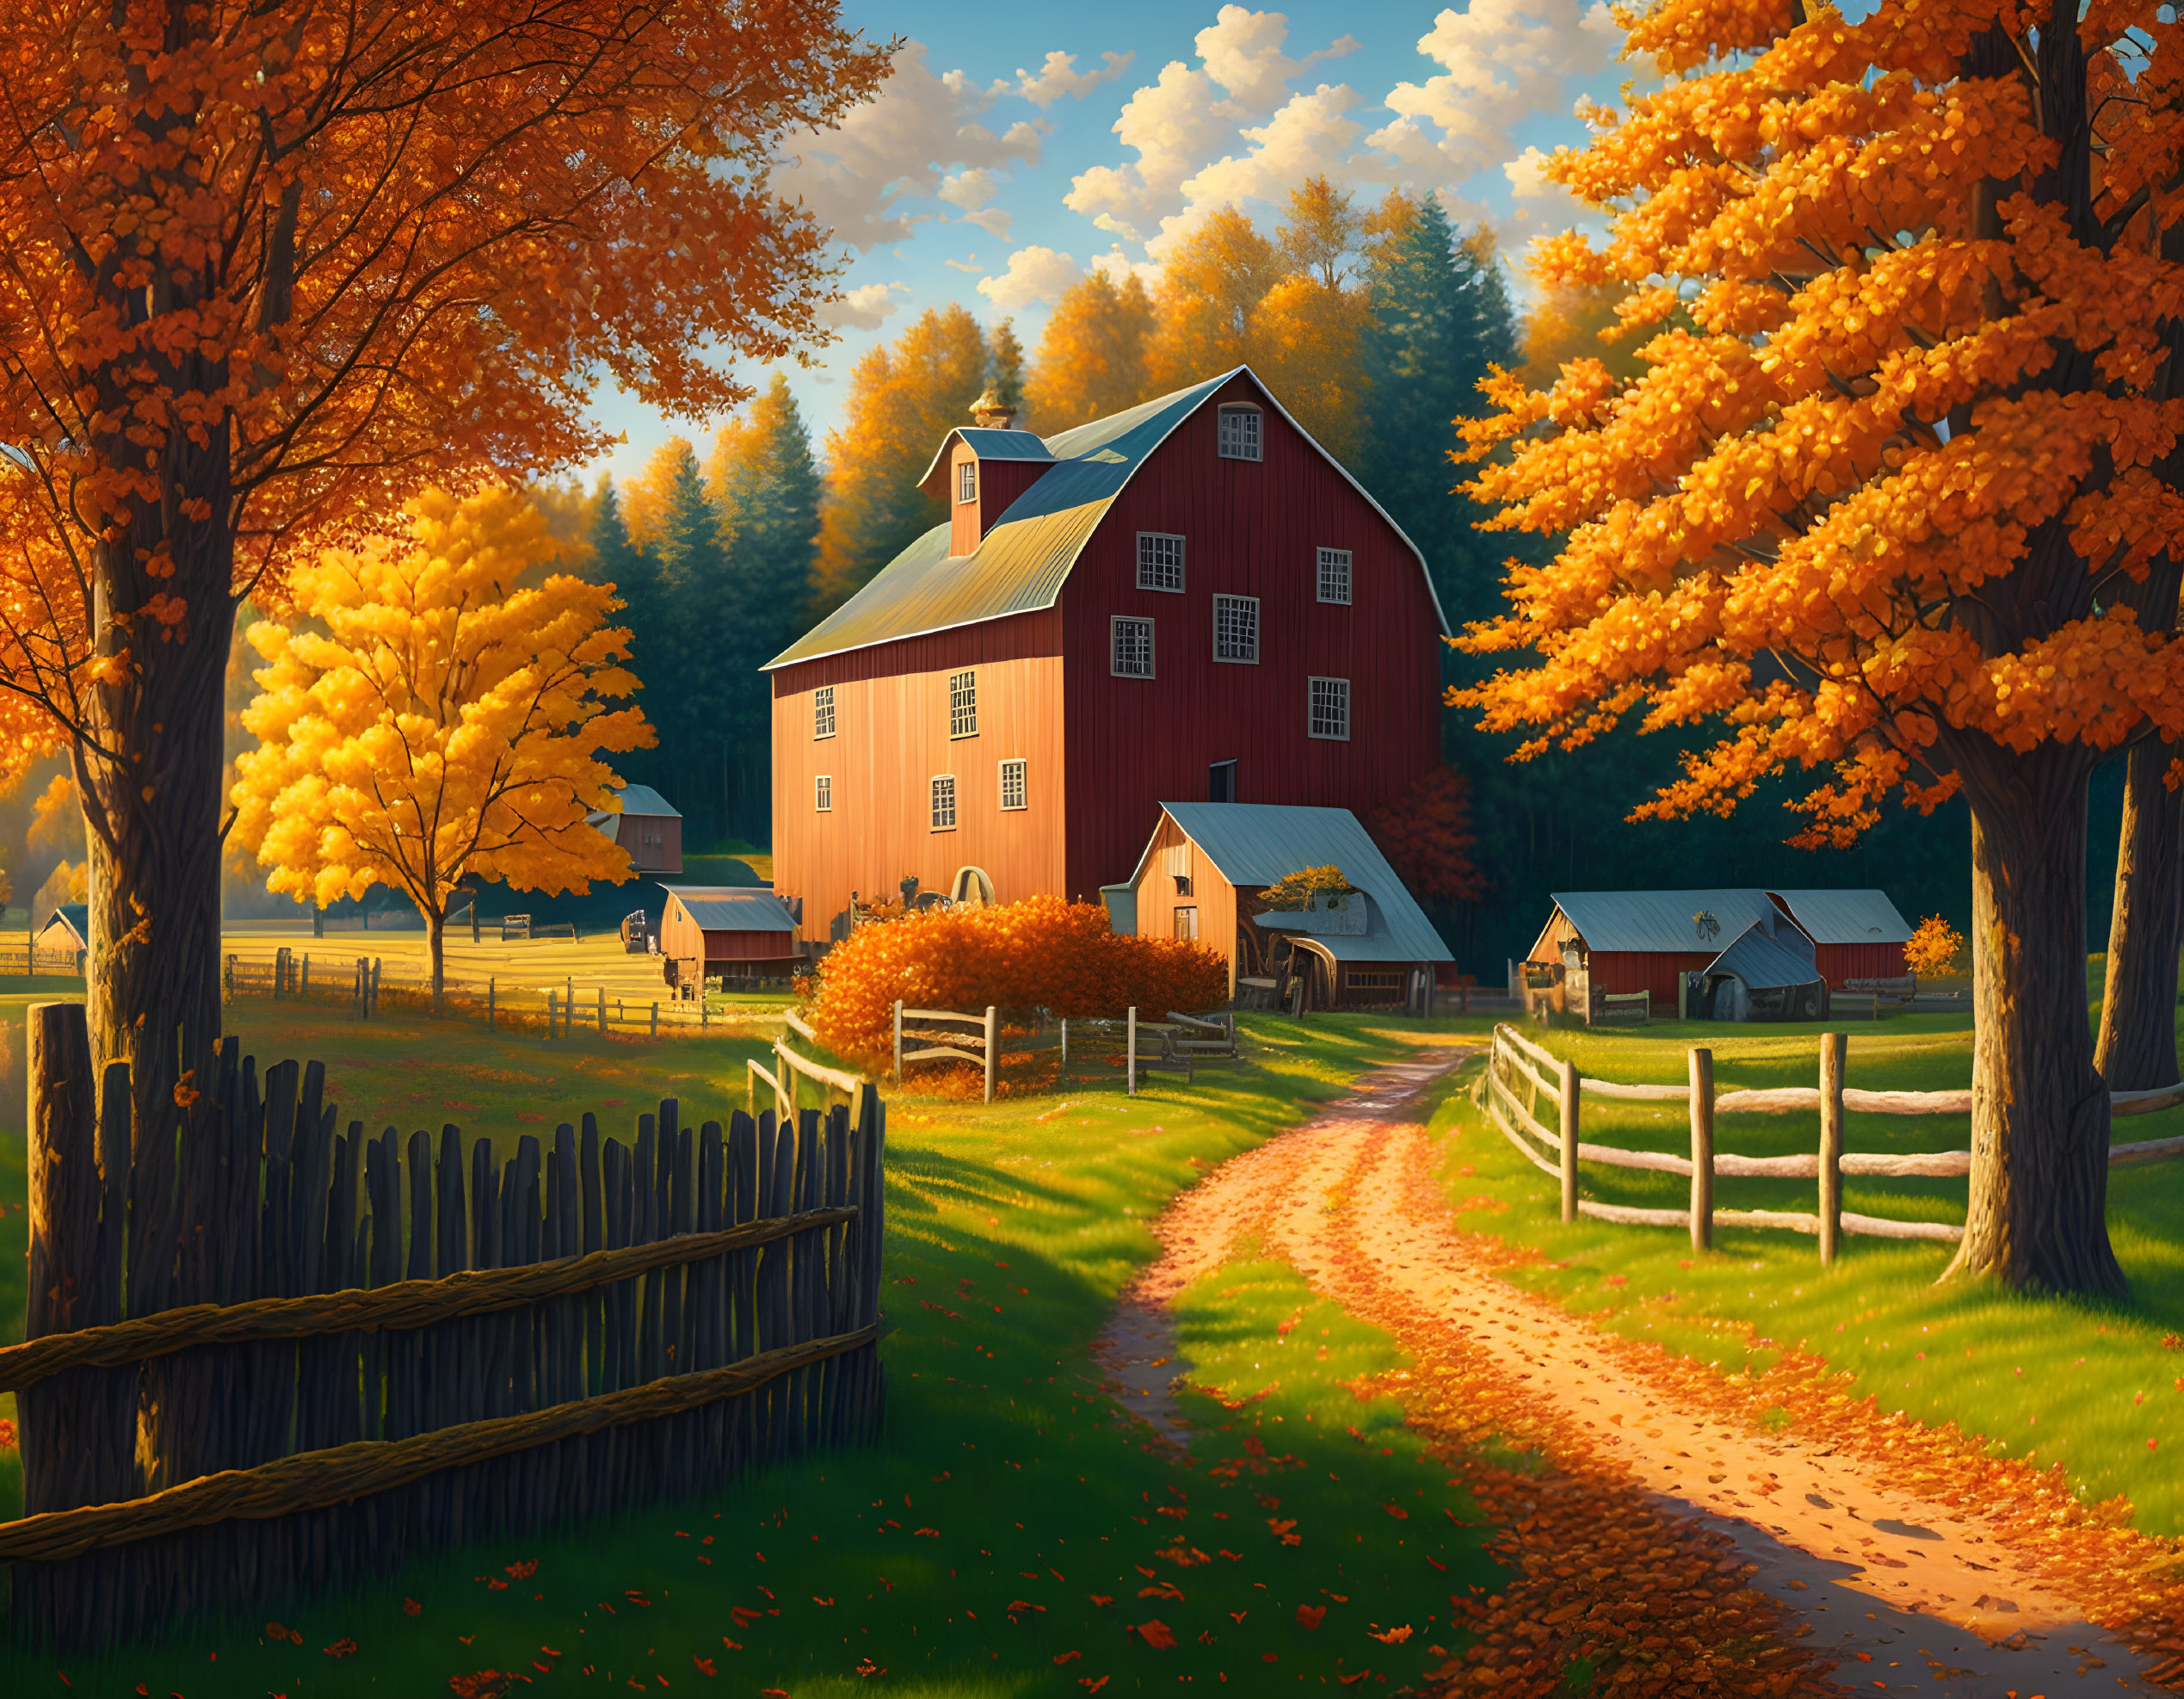 Red barn, golden foliage, winding path: picturesque autumn scene